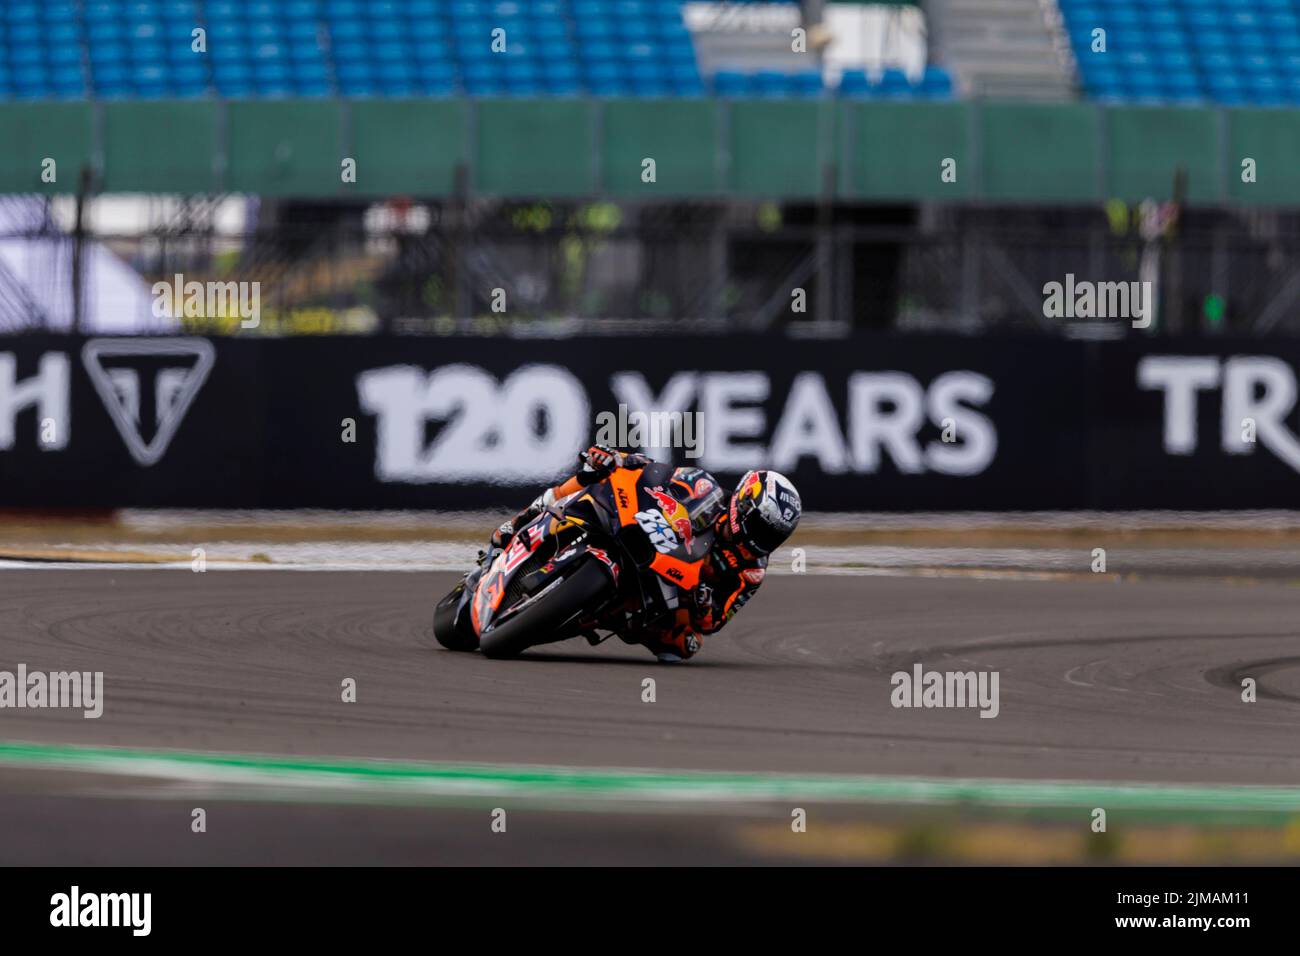 Silverstone, UK. 5th August 2022; Silverstone Circuit, Silverstone, Northamptonshire, England: British MotoGP Grand Prix, Free Practice: Number 88 Red Bull KTM Factory Racing bike ridden by Miguel Oliveira during free practice 2 at the British MotoGP Credit: Action Plus Sports Images/Alamy Live News Stock Photo